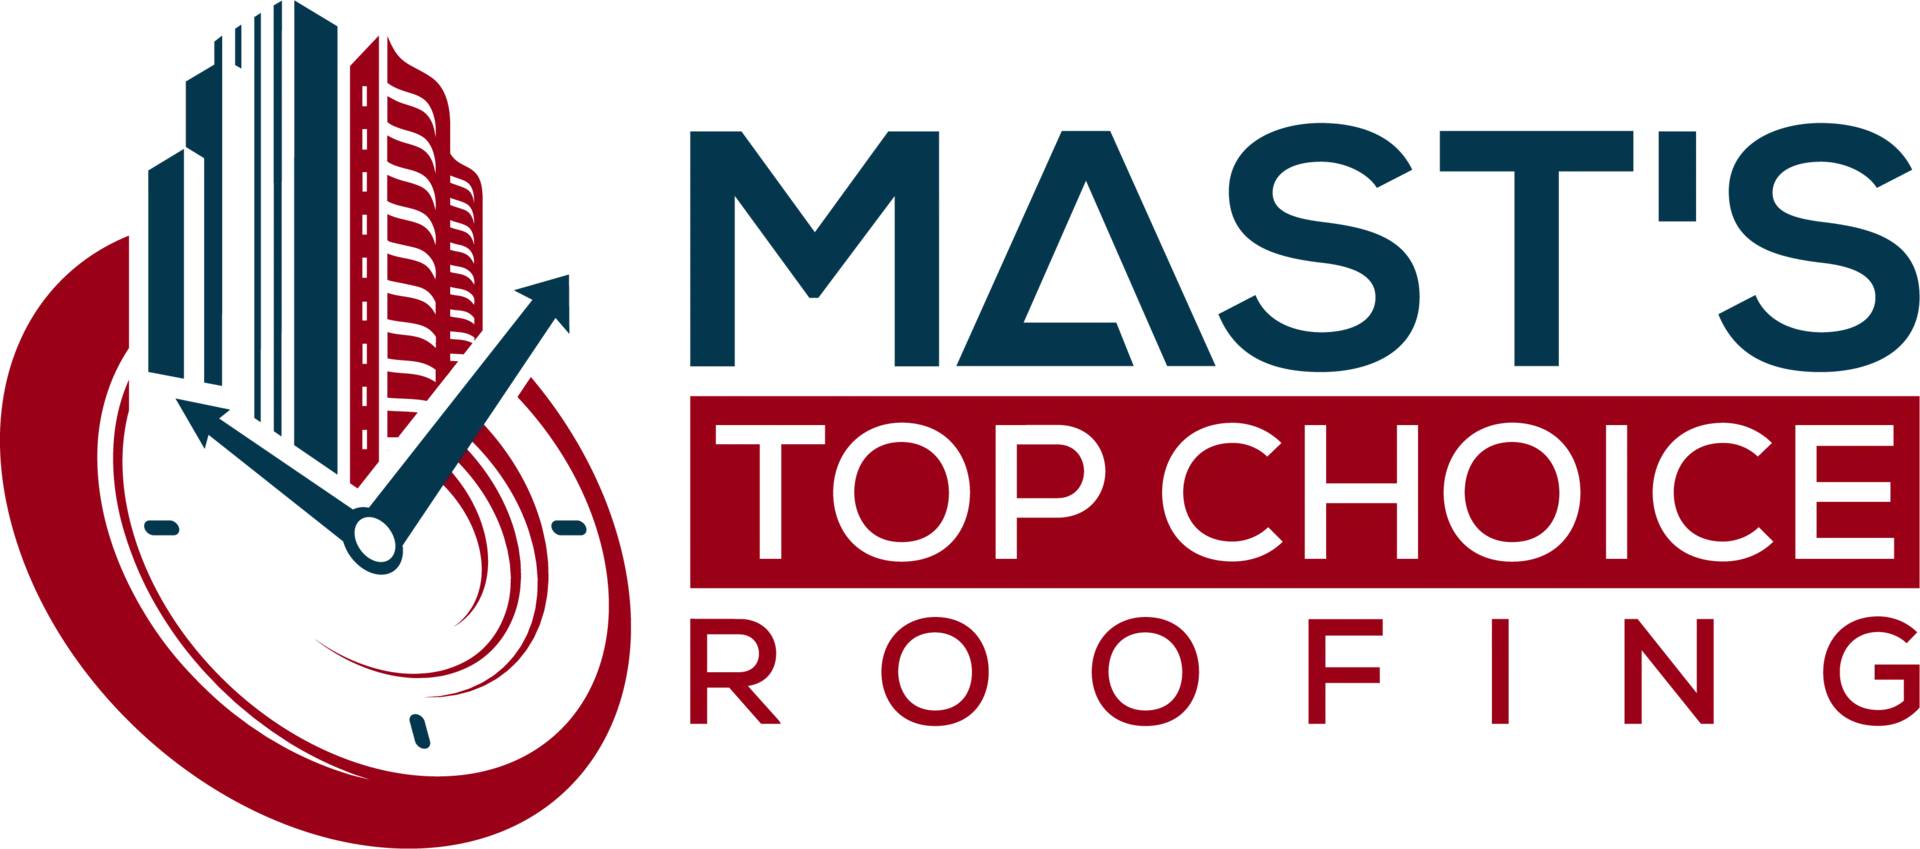 Mast's Top Choice Roofing